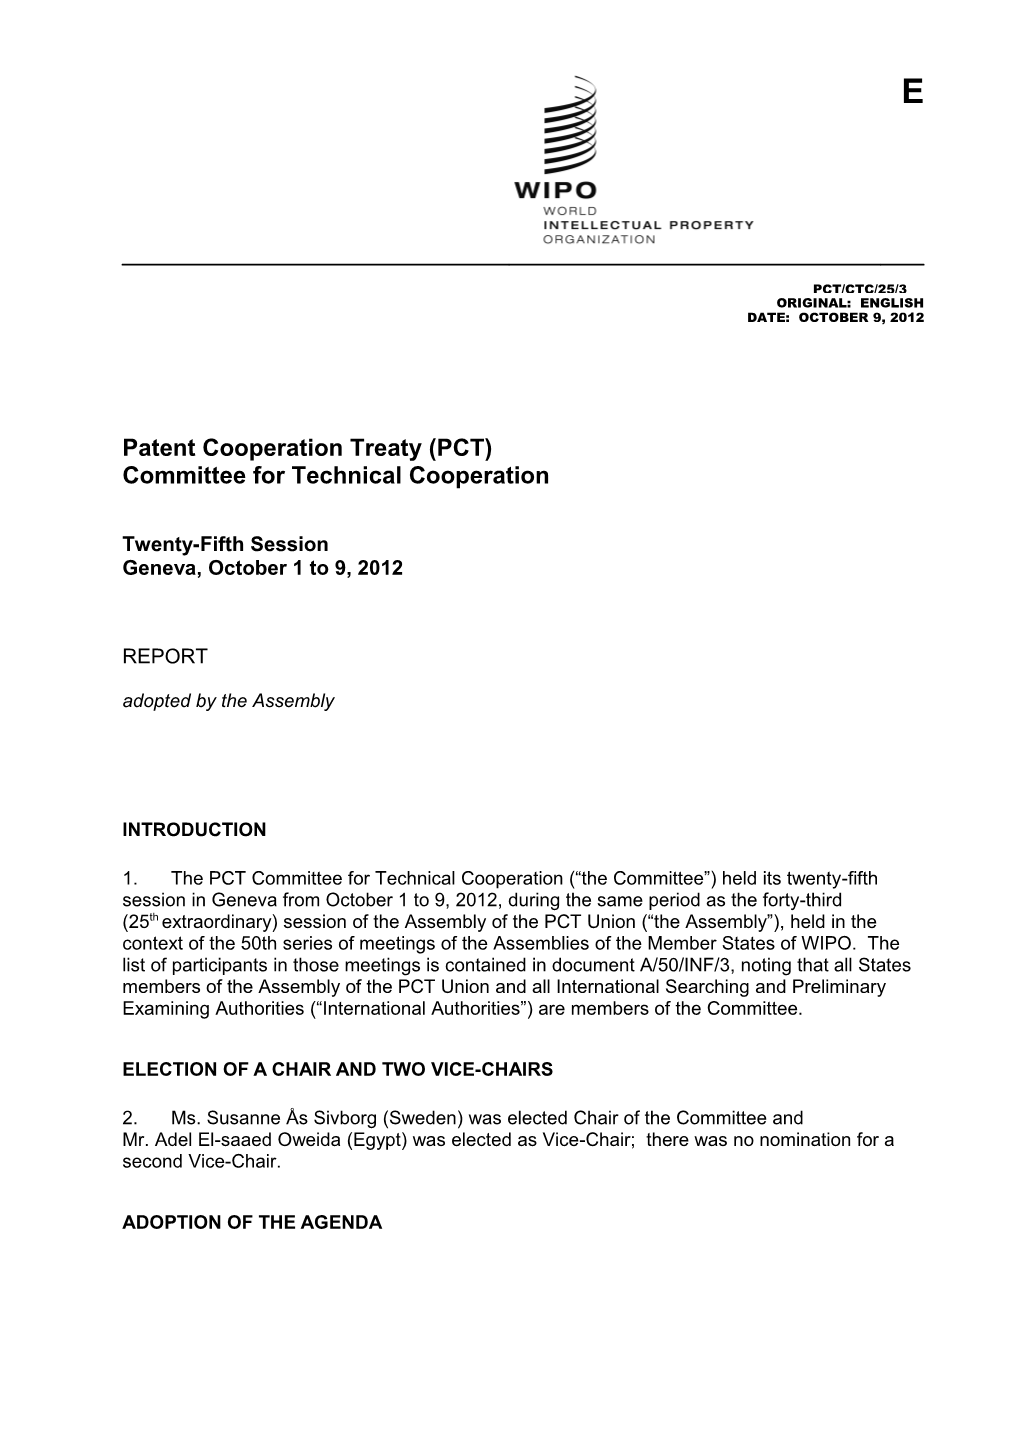 Patent Cooperation Treaty (PCT) Committee for Technical Cooperation